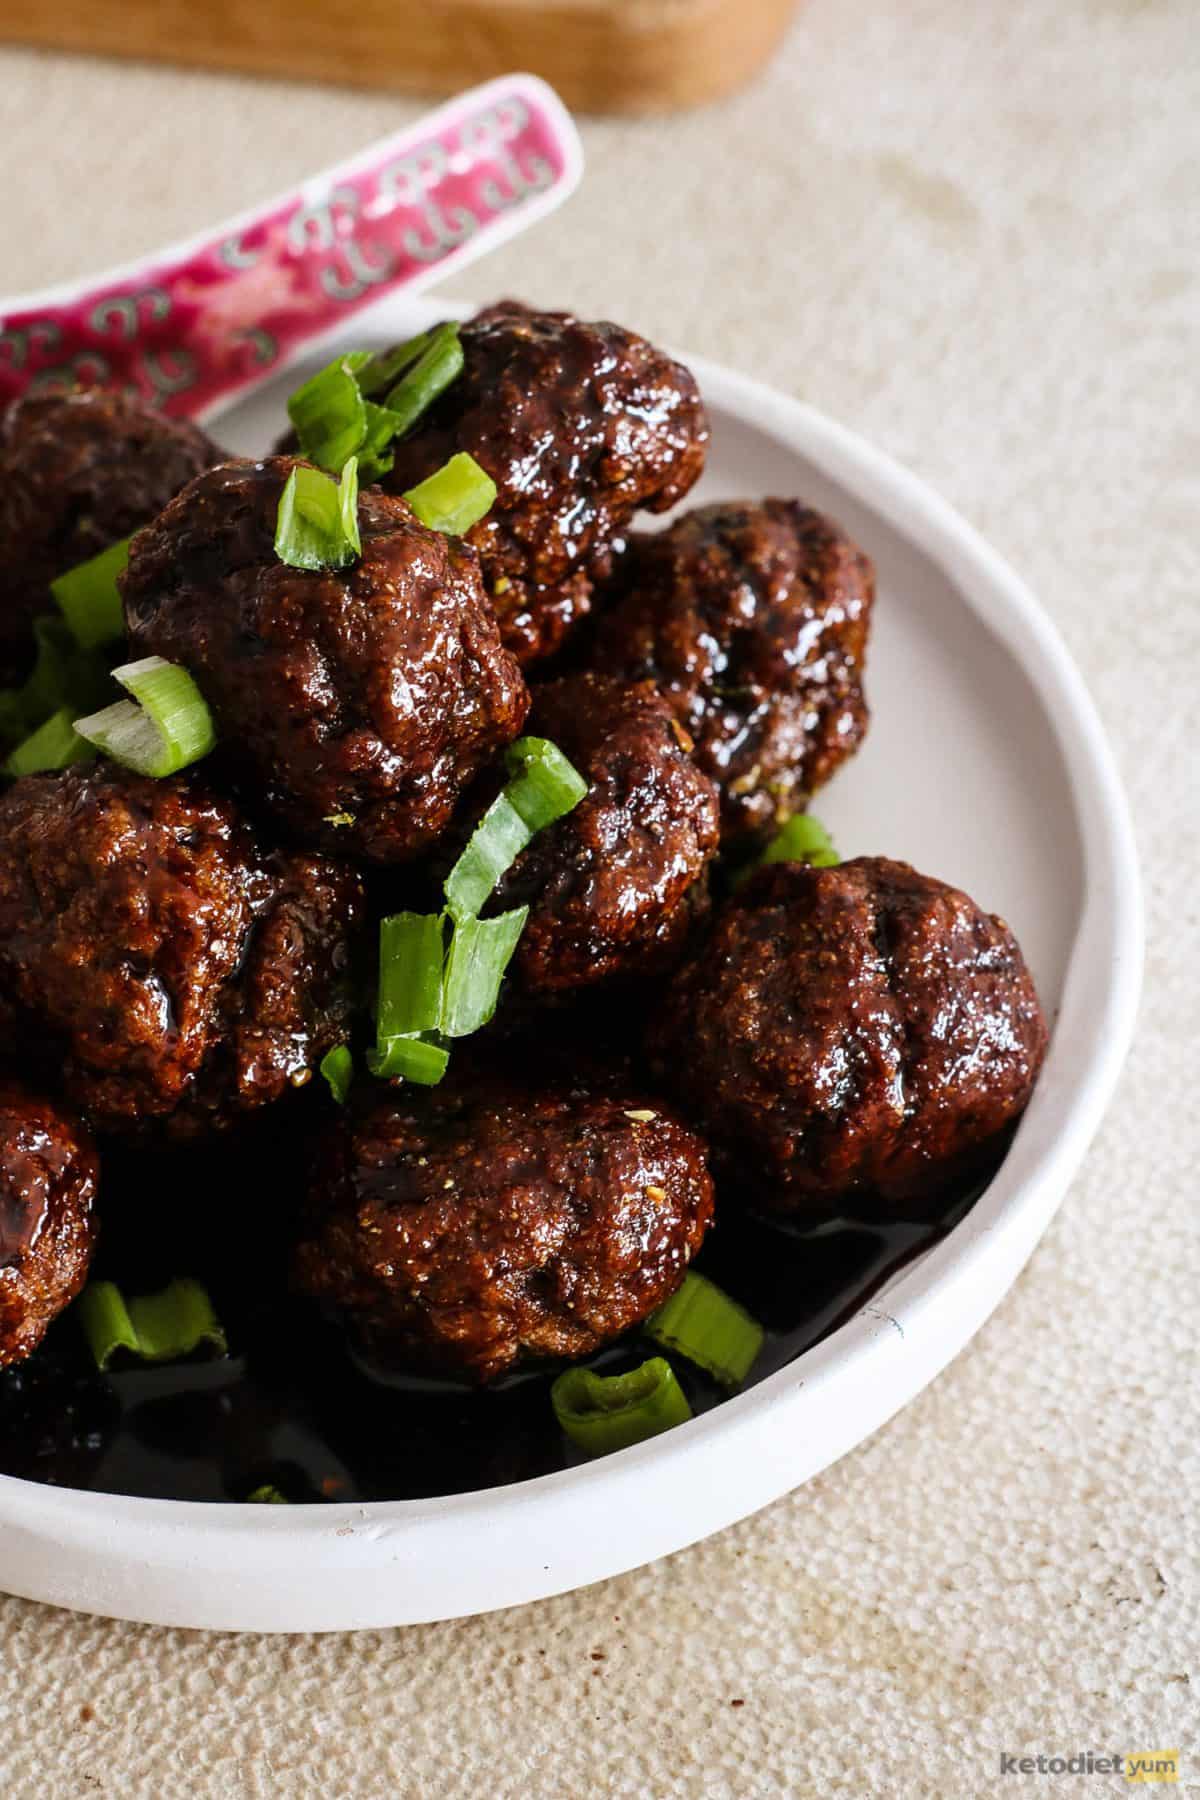 A bowl of savory and sticky keto Kung Pao meatballs garnished with diced green onion and ready to eat